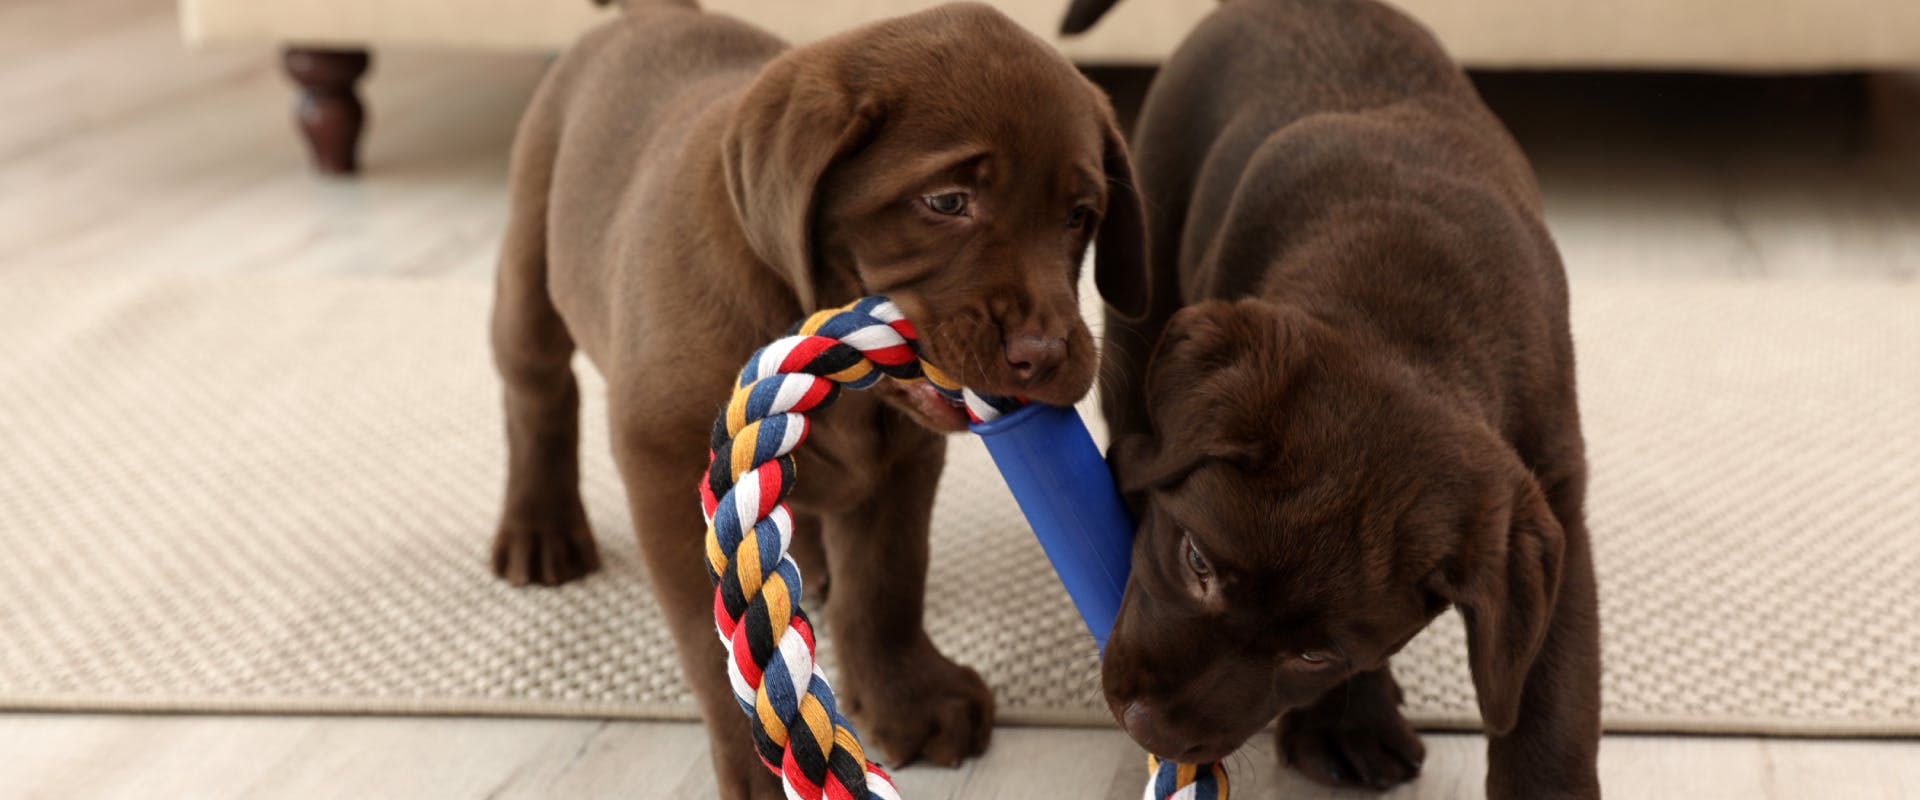 two chocolate Labrador puppies playing and chewing a chew toy next to a coach inside